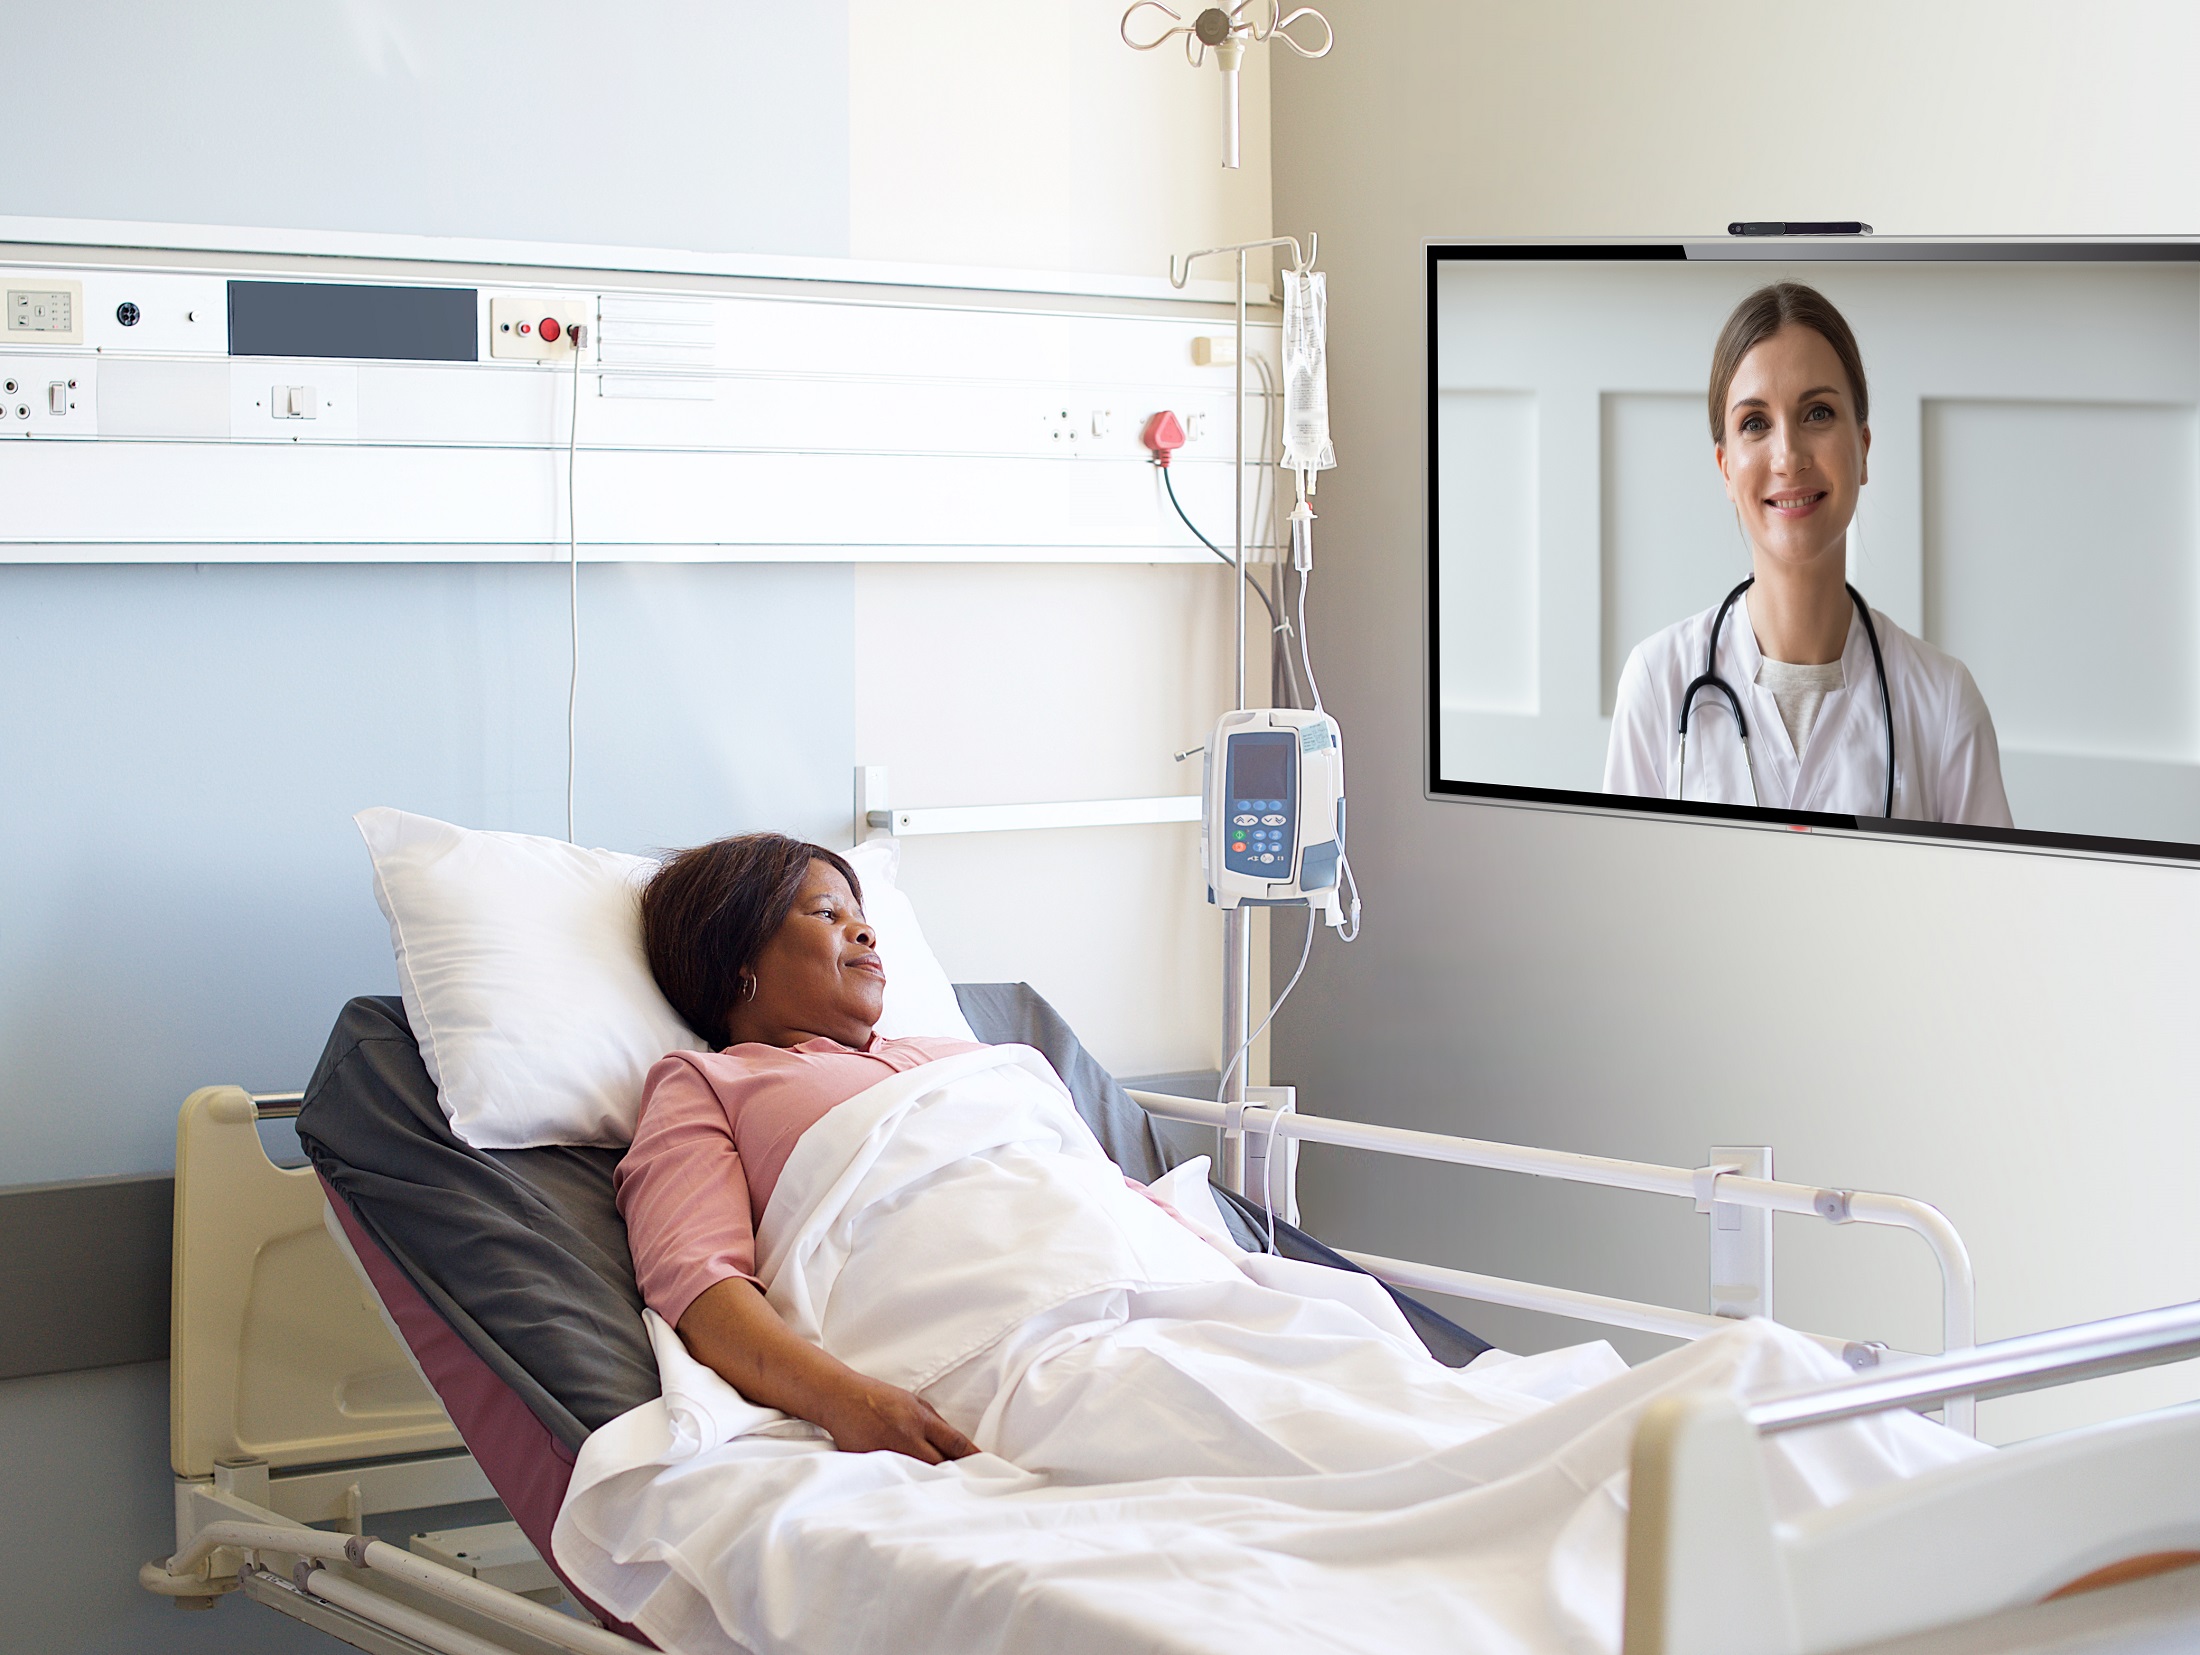 A patient who is resting in a bed is having a video chat with her doctor with the help of LG healthcare TV installed on the wall.